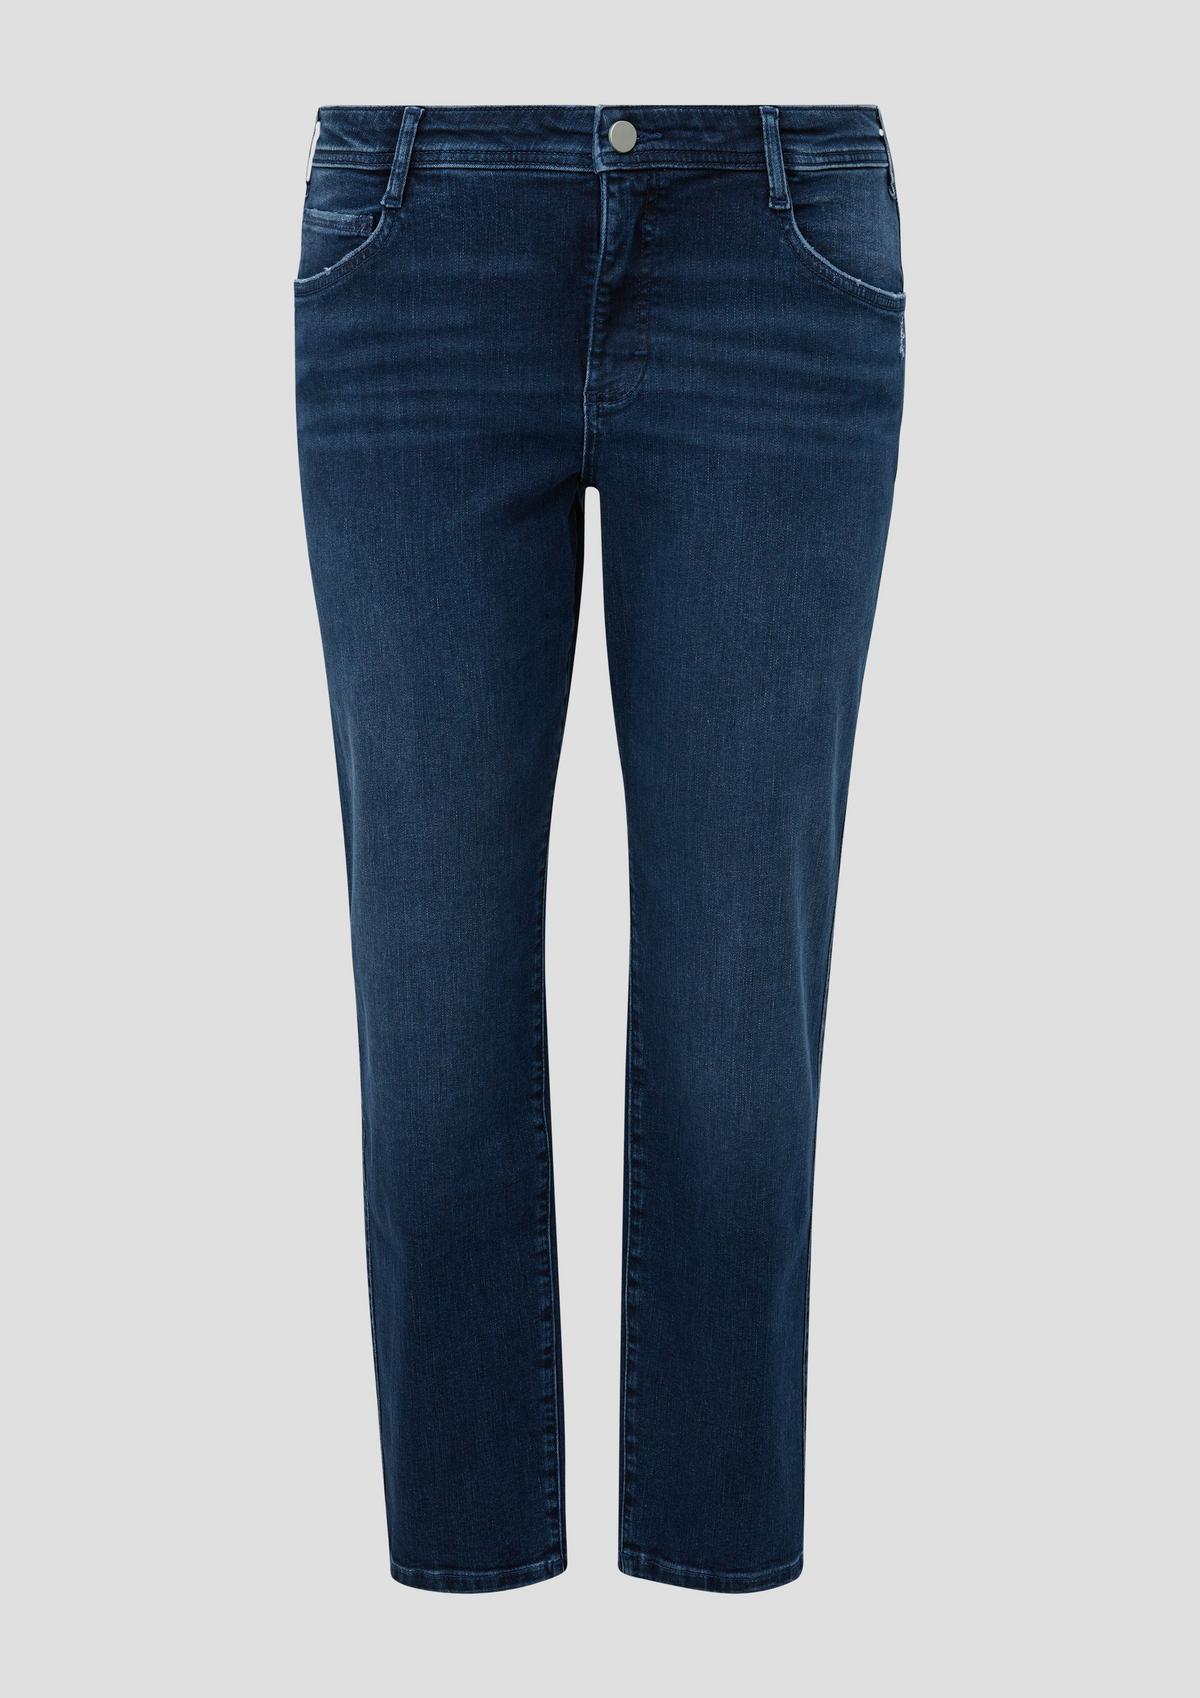 s.Oliver Jeans / Curvy Fit / Mid Rise / Straight Leg